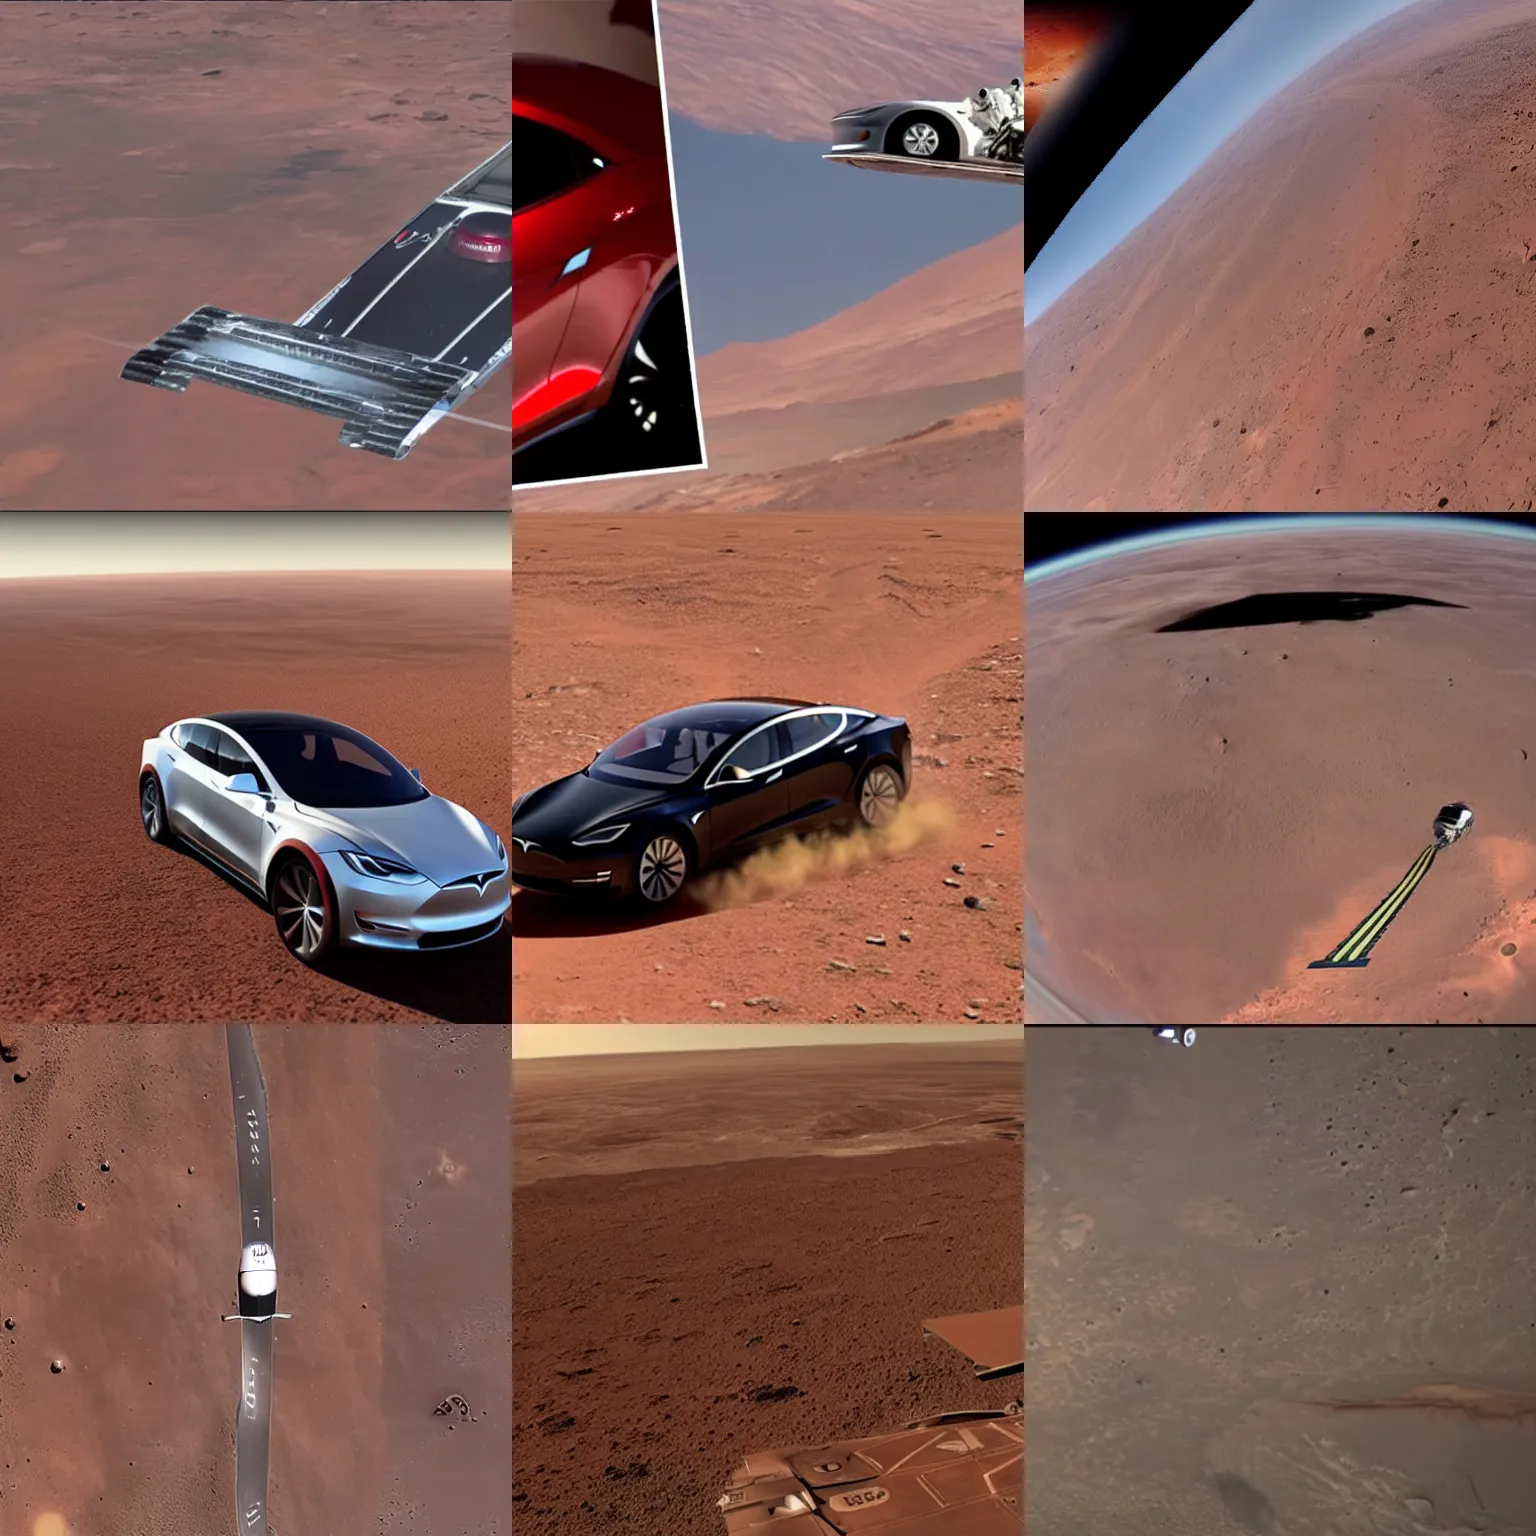 Prompt: Elon Musk flies a Tesla car into space to conquer the red planet mars.